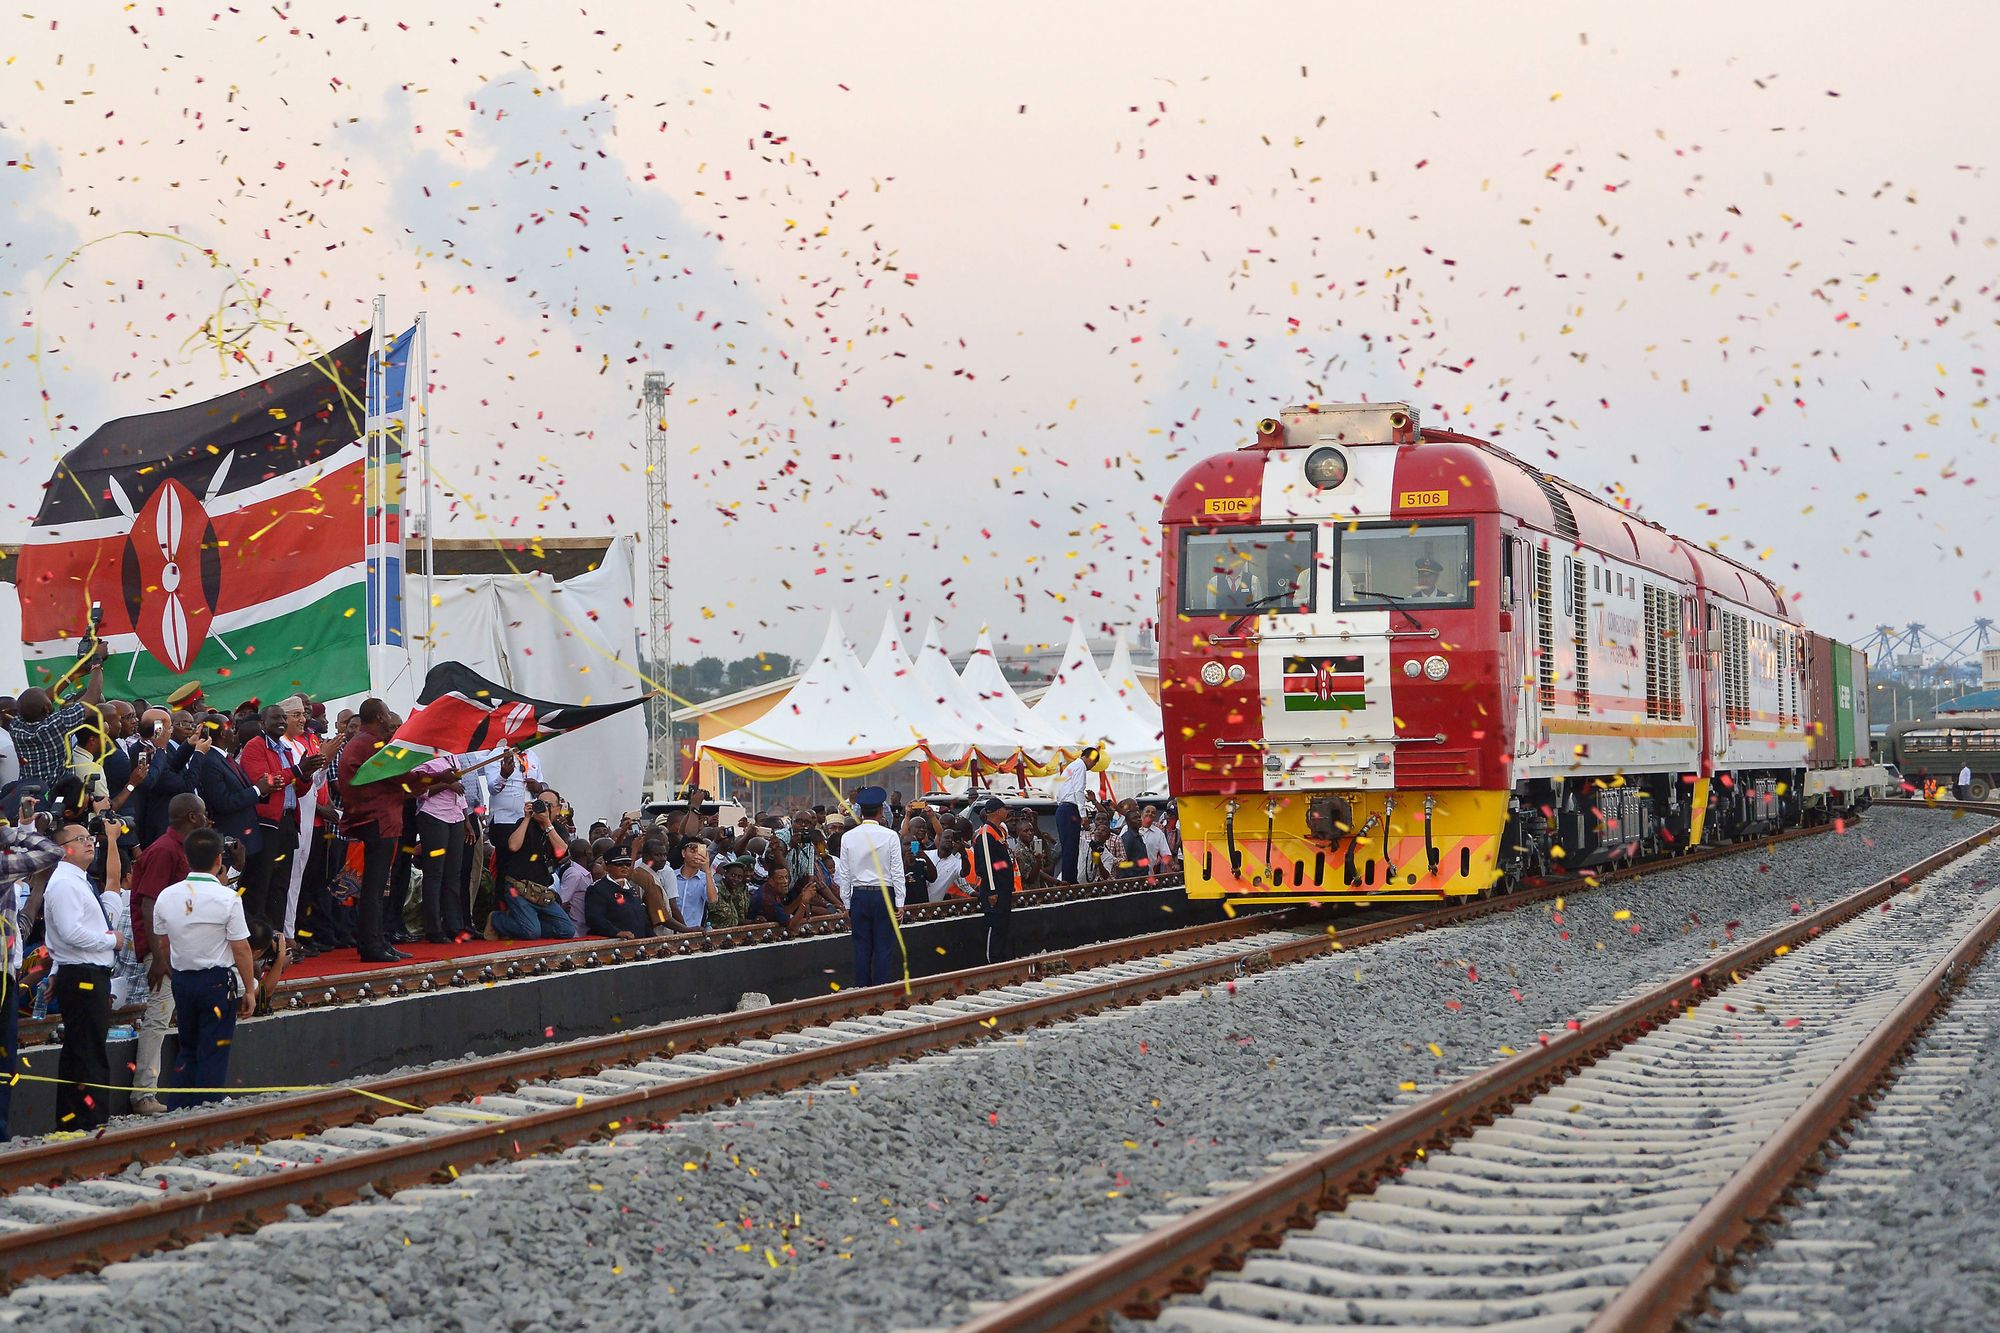 China Built a Railway in Kenya that Leads to Nowhere